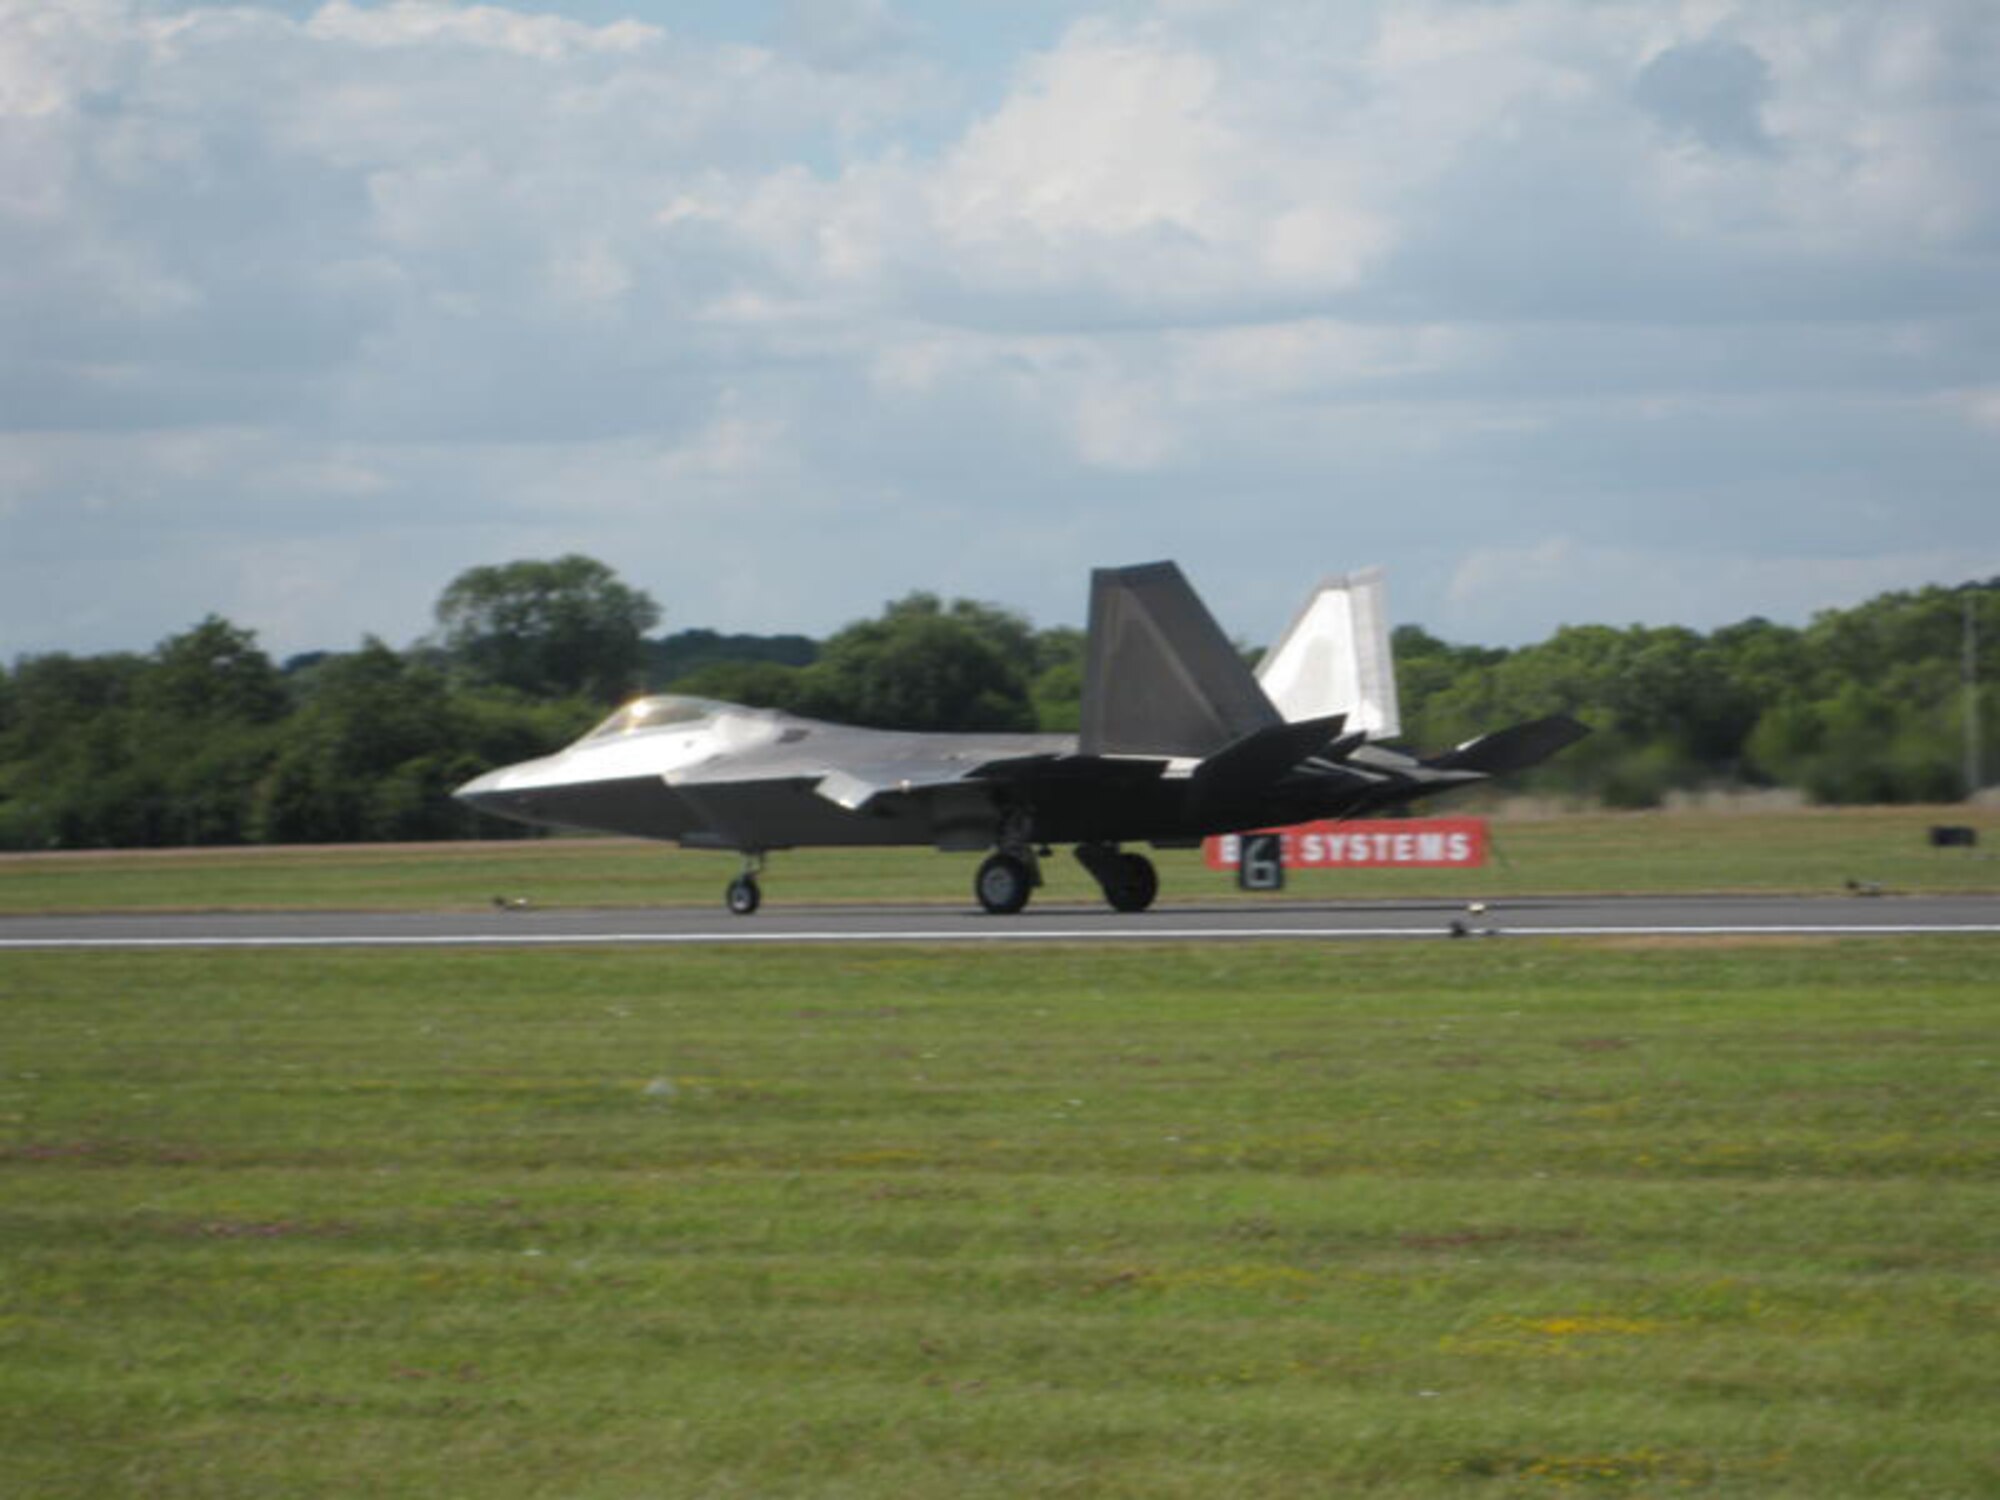 A U.S. Air Force F-22A Raptor based out of Joint Base Elmendorf-Richardson in Alaska lands after an aerial demonstration, flown by Maj. Dave Skalicky, F-22 Demonstration Team pilot, during the Royal International Air Tattoo July 17, 2010, at RAF Fairford, United Kingdom. RIAT is held annually and boast itself as "the world's largest military airshow."  (U.S. Air Force photo/Chief Master Sgt. Greg Wade) 